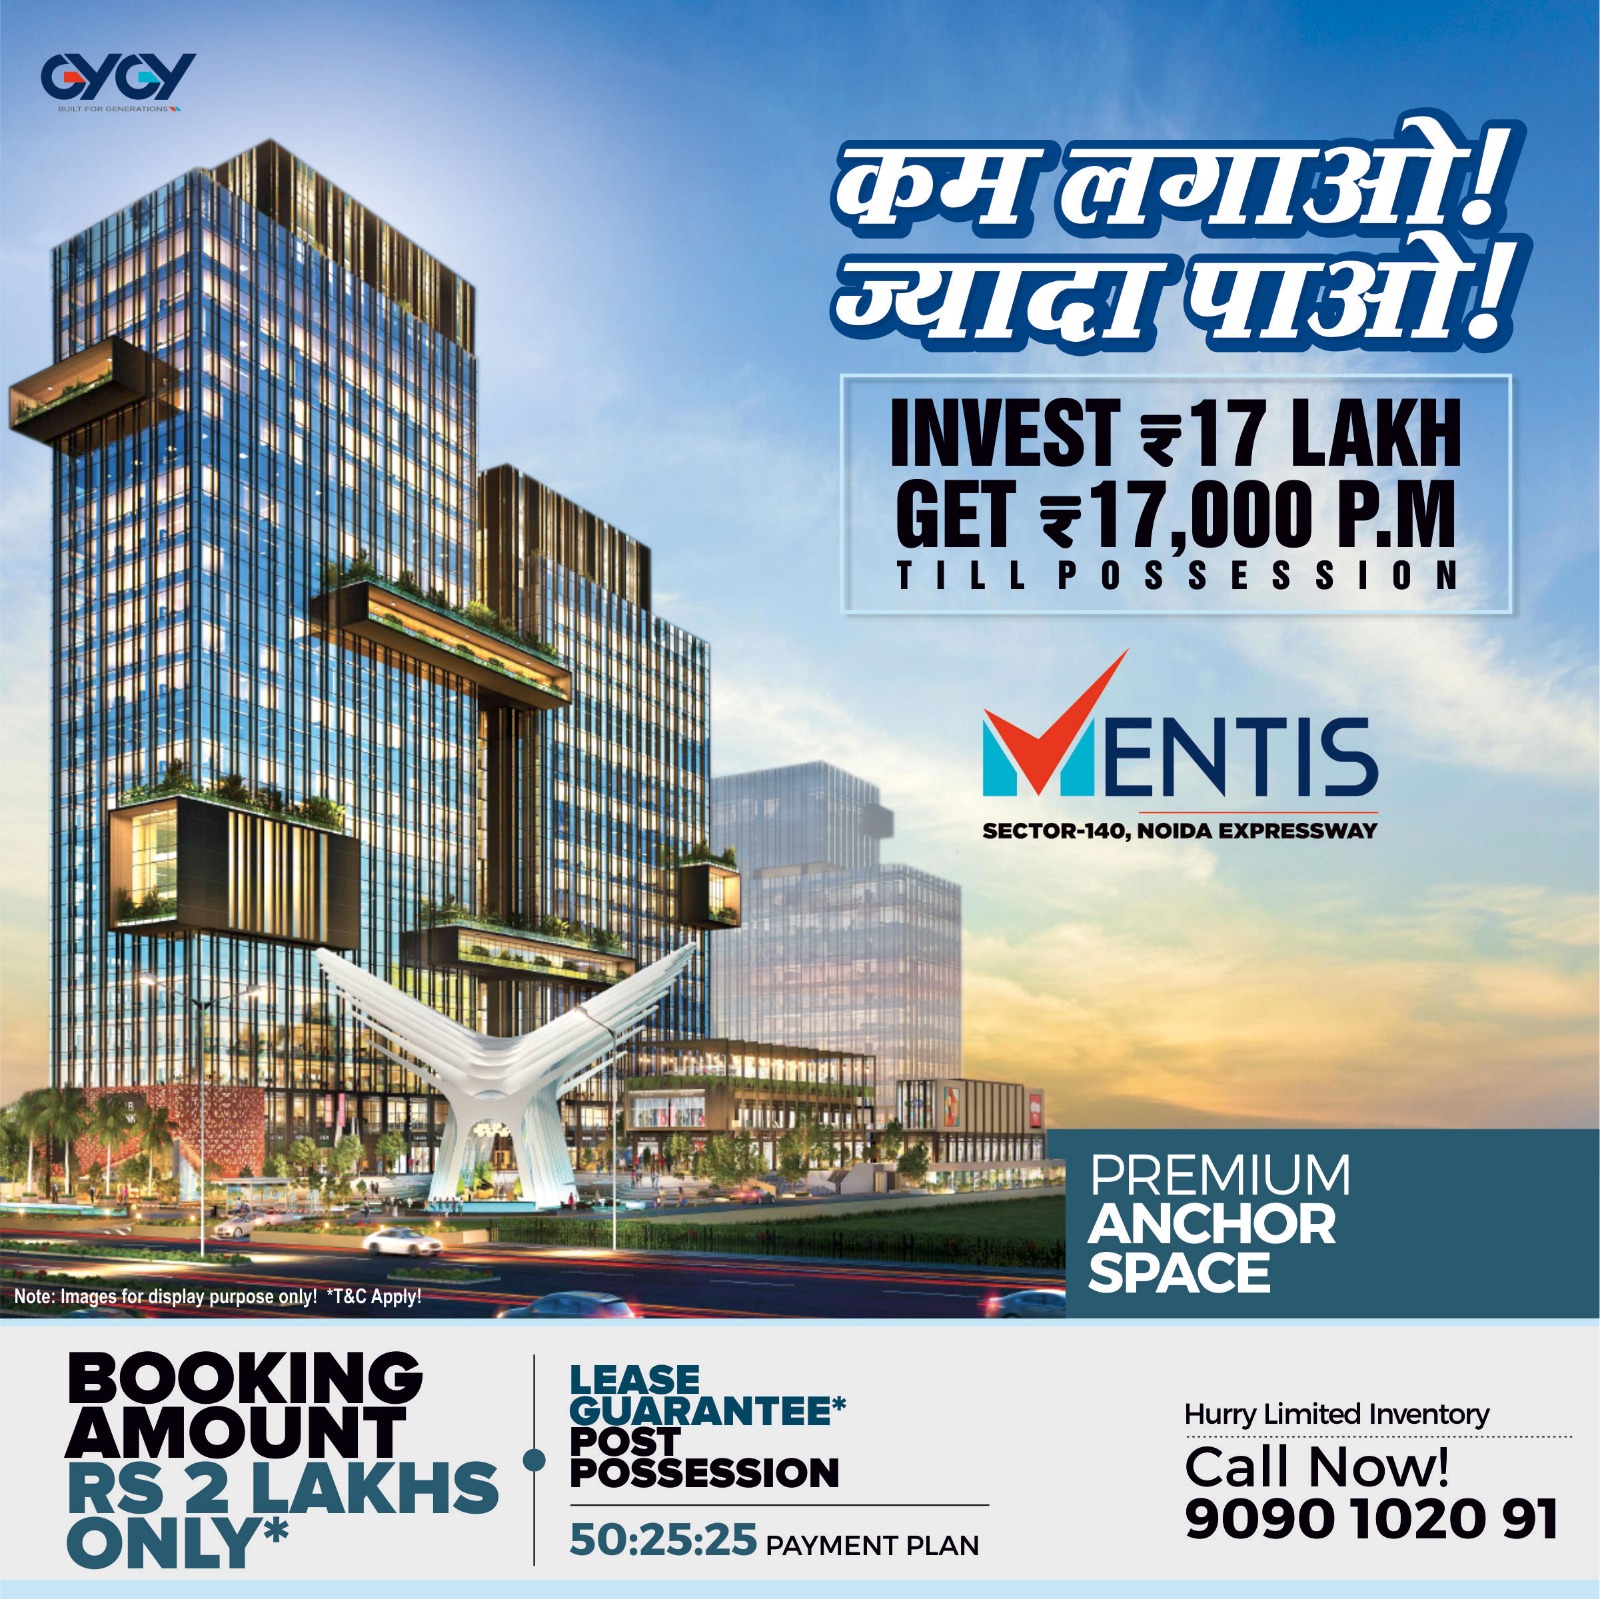 GYGY Mentis Anchor Space at 140 Noida: A Golden Opportunity for Retail Investment